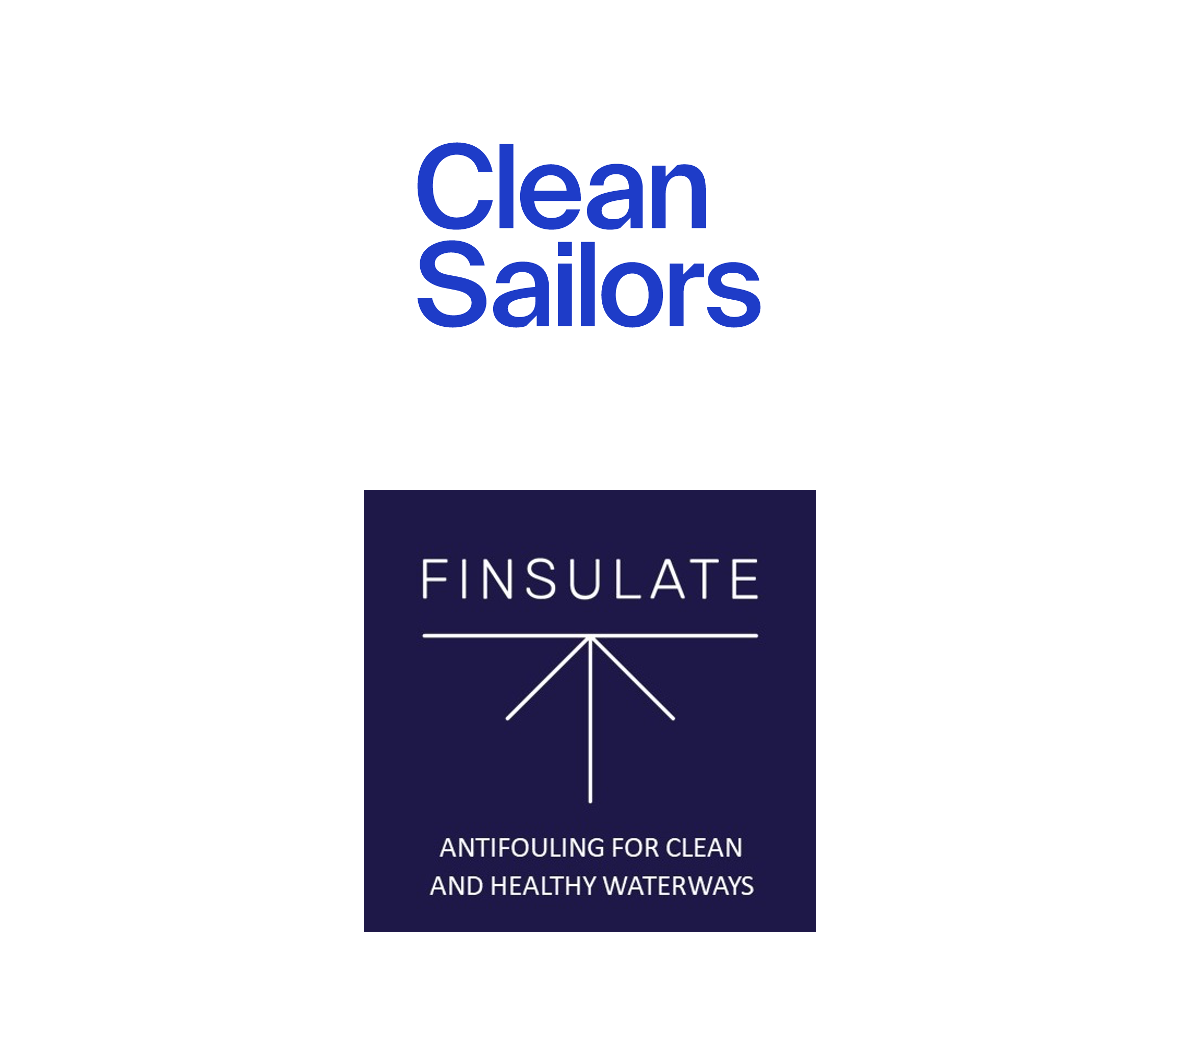 Finsulate stands behind Clean Sailors movement